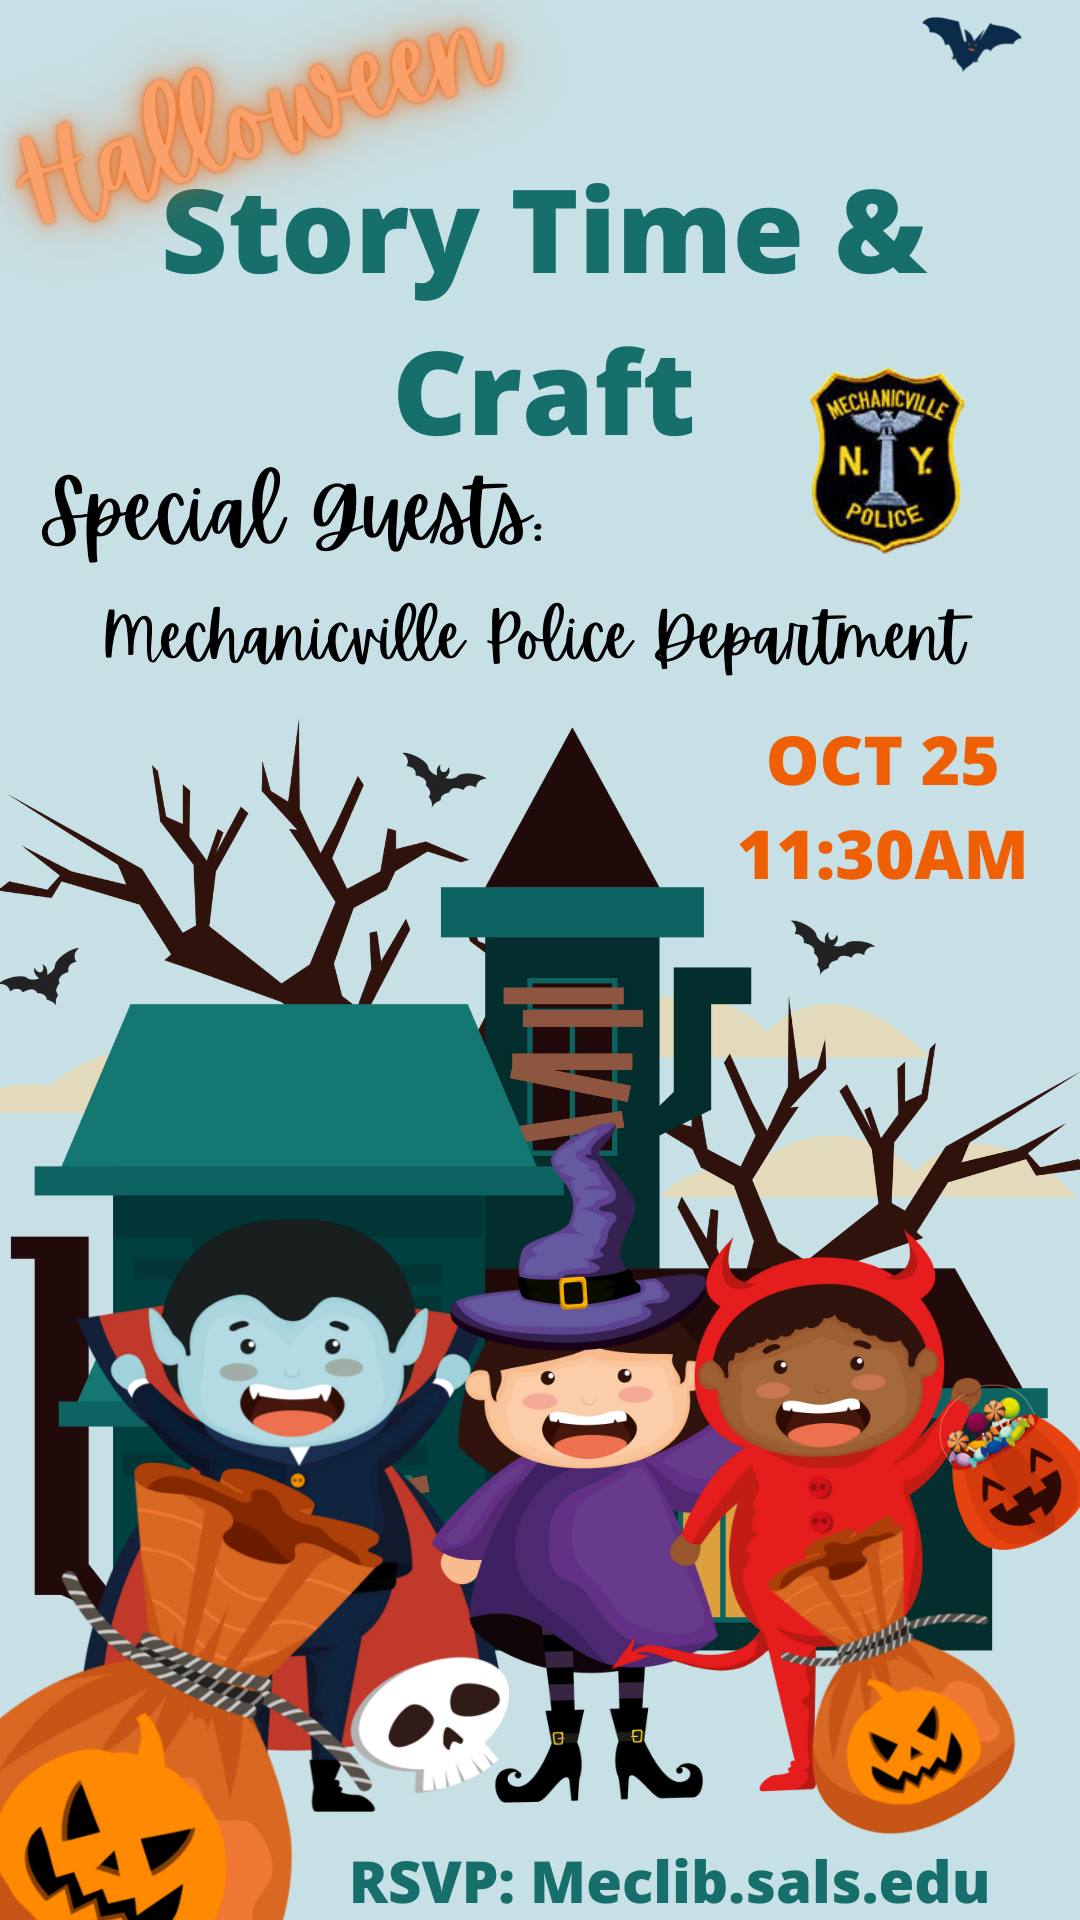 Story Time & Craft: Special Visit from Mechanicville Police Department